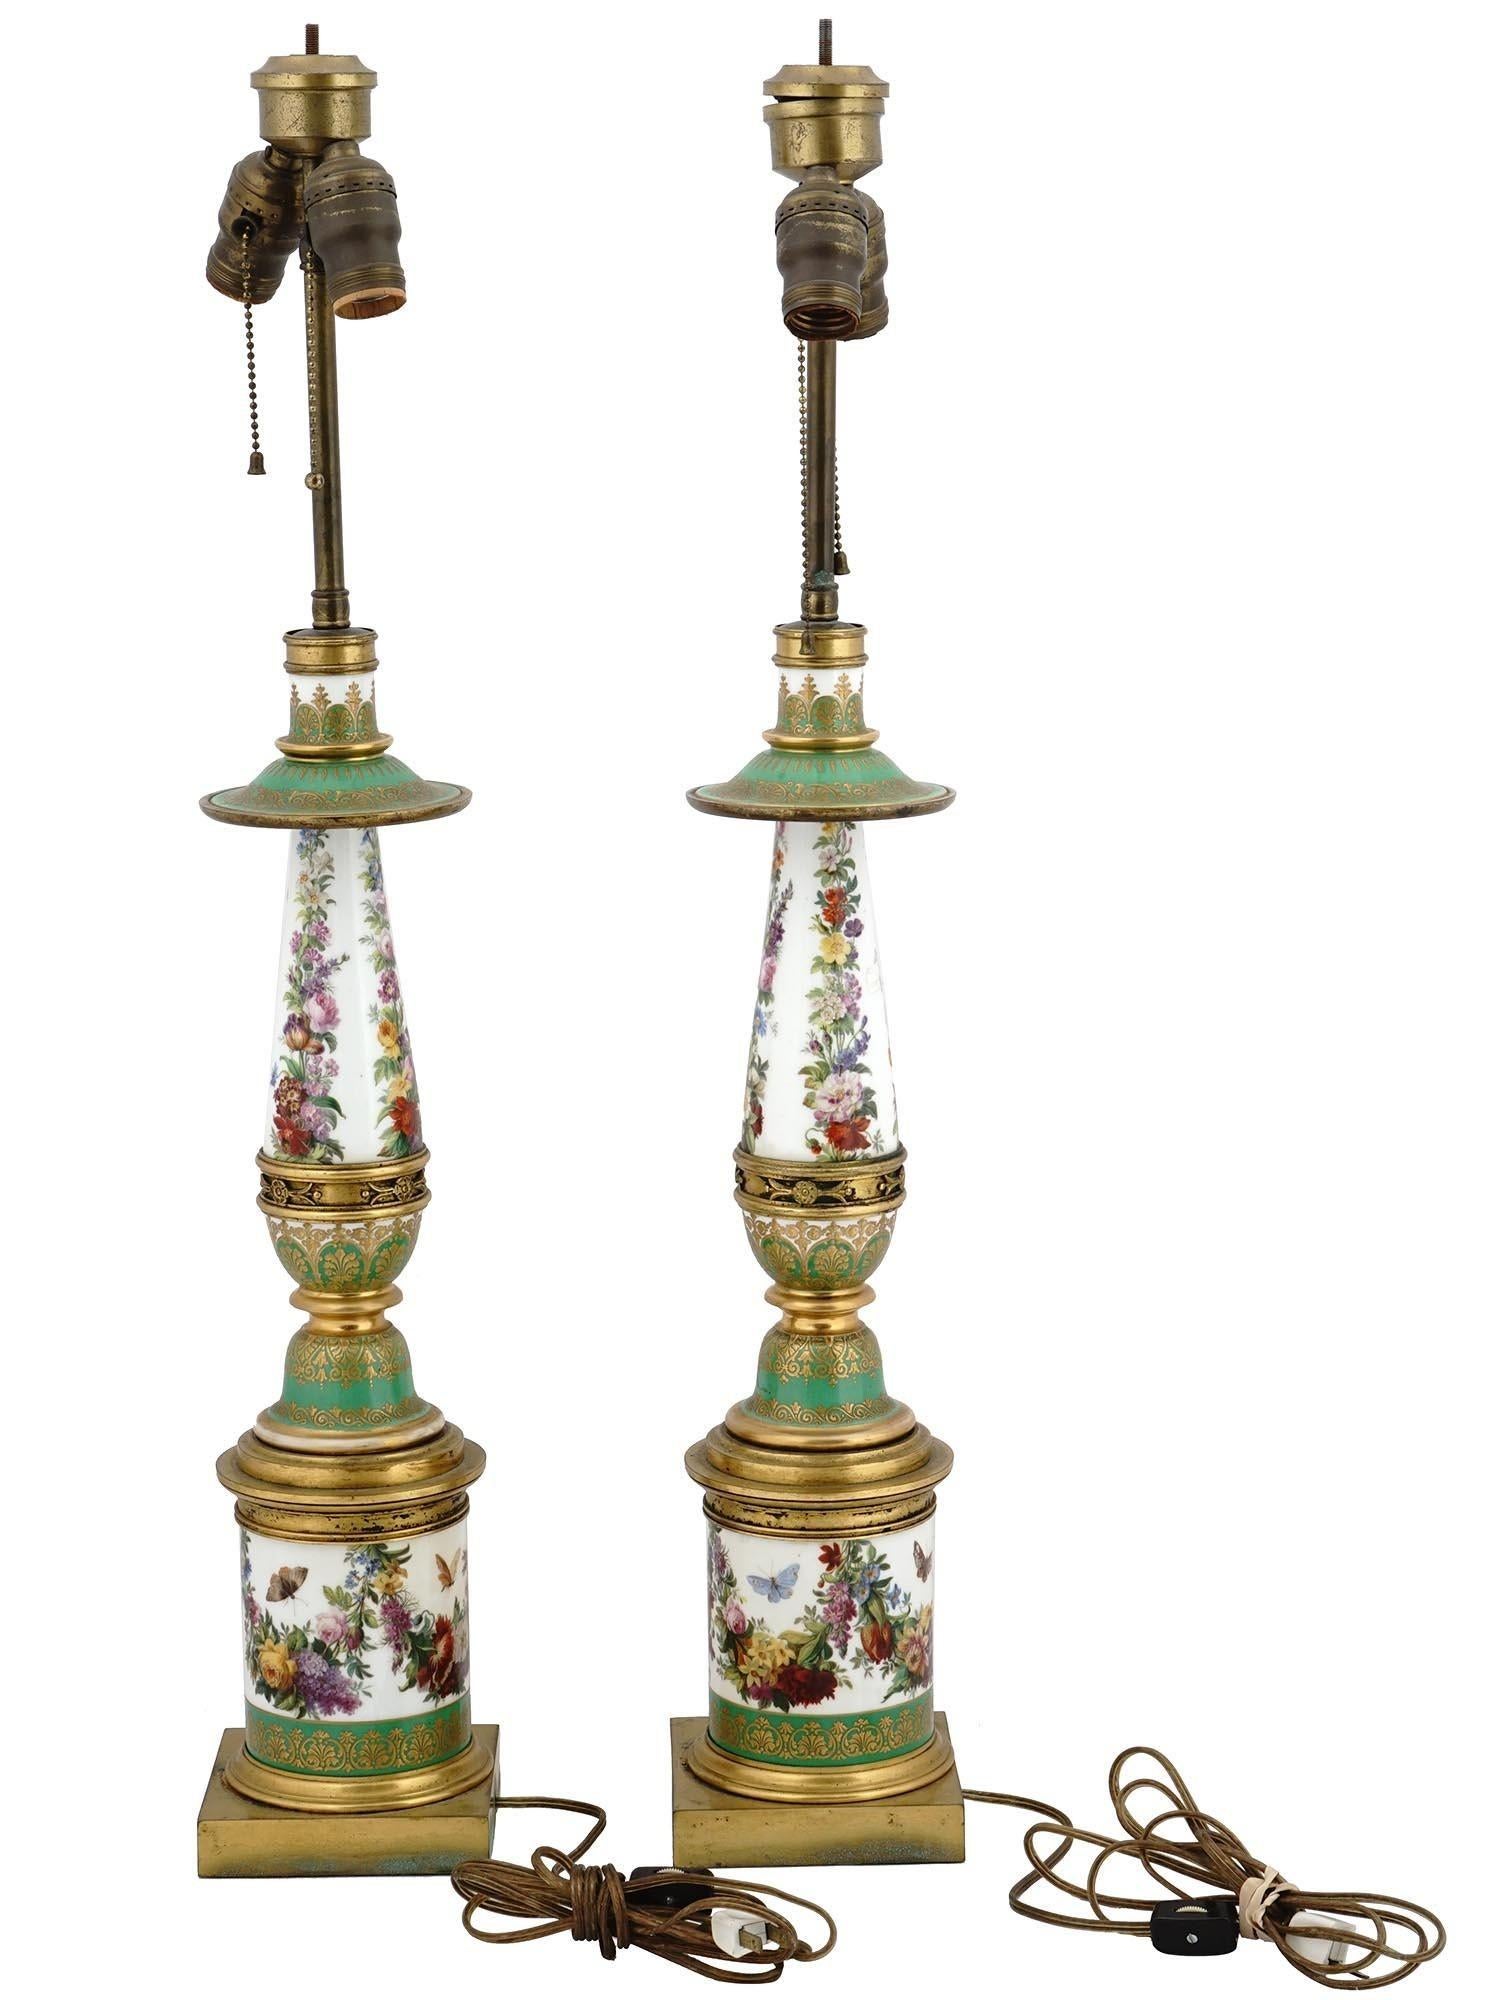 Pair 19th Century French Empire Style bronze mounted Porcelain Table Lamp with fine gilding and hand-painted floral motifs on white and green ground.